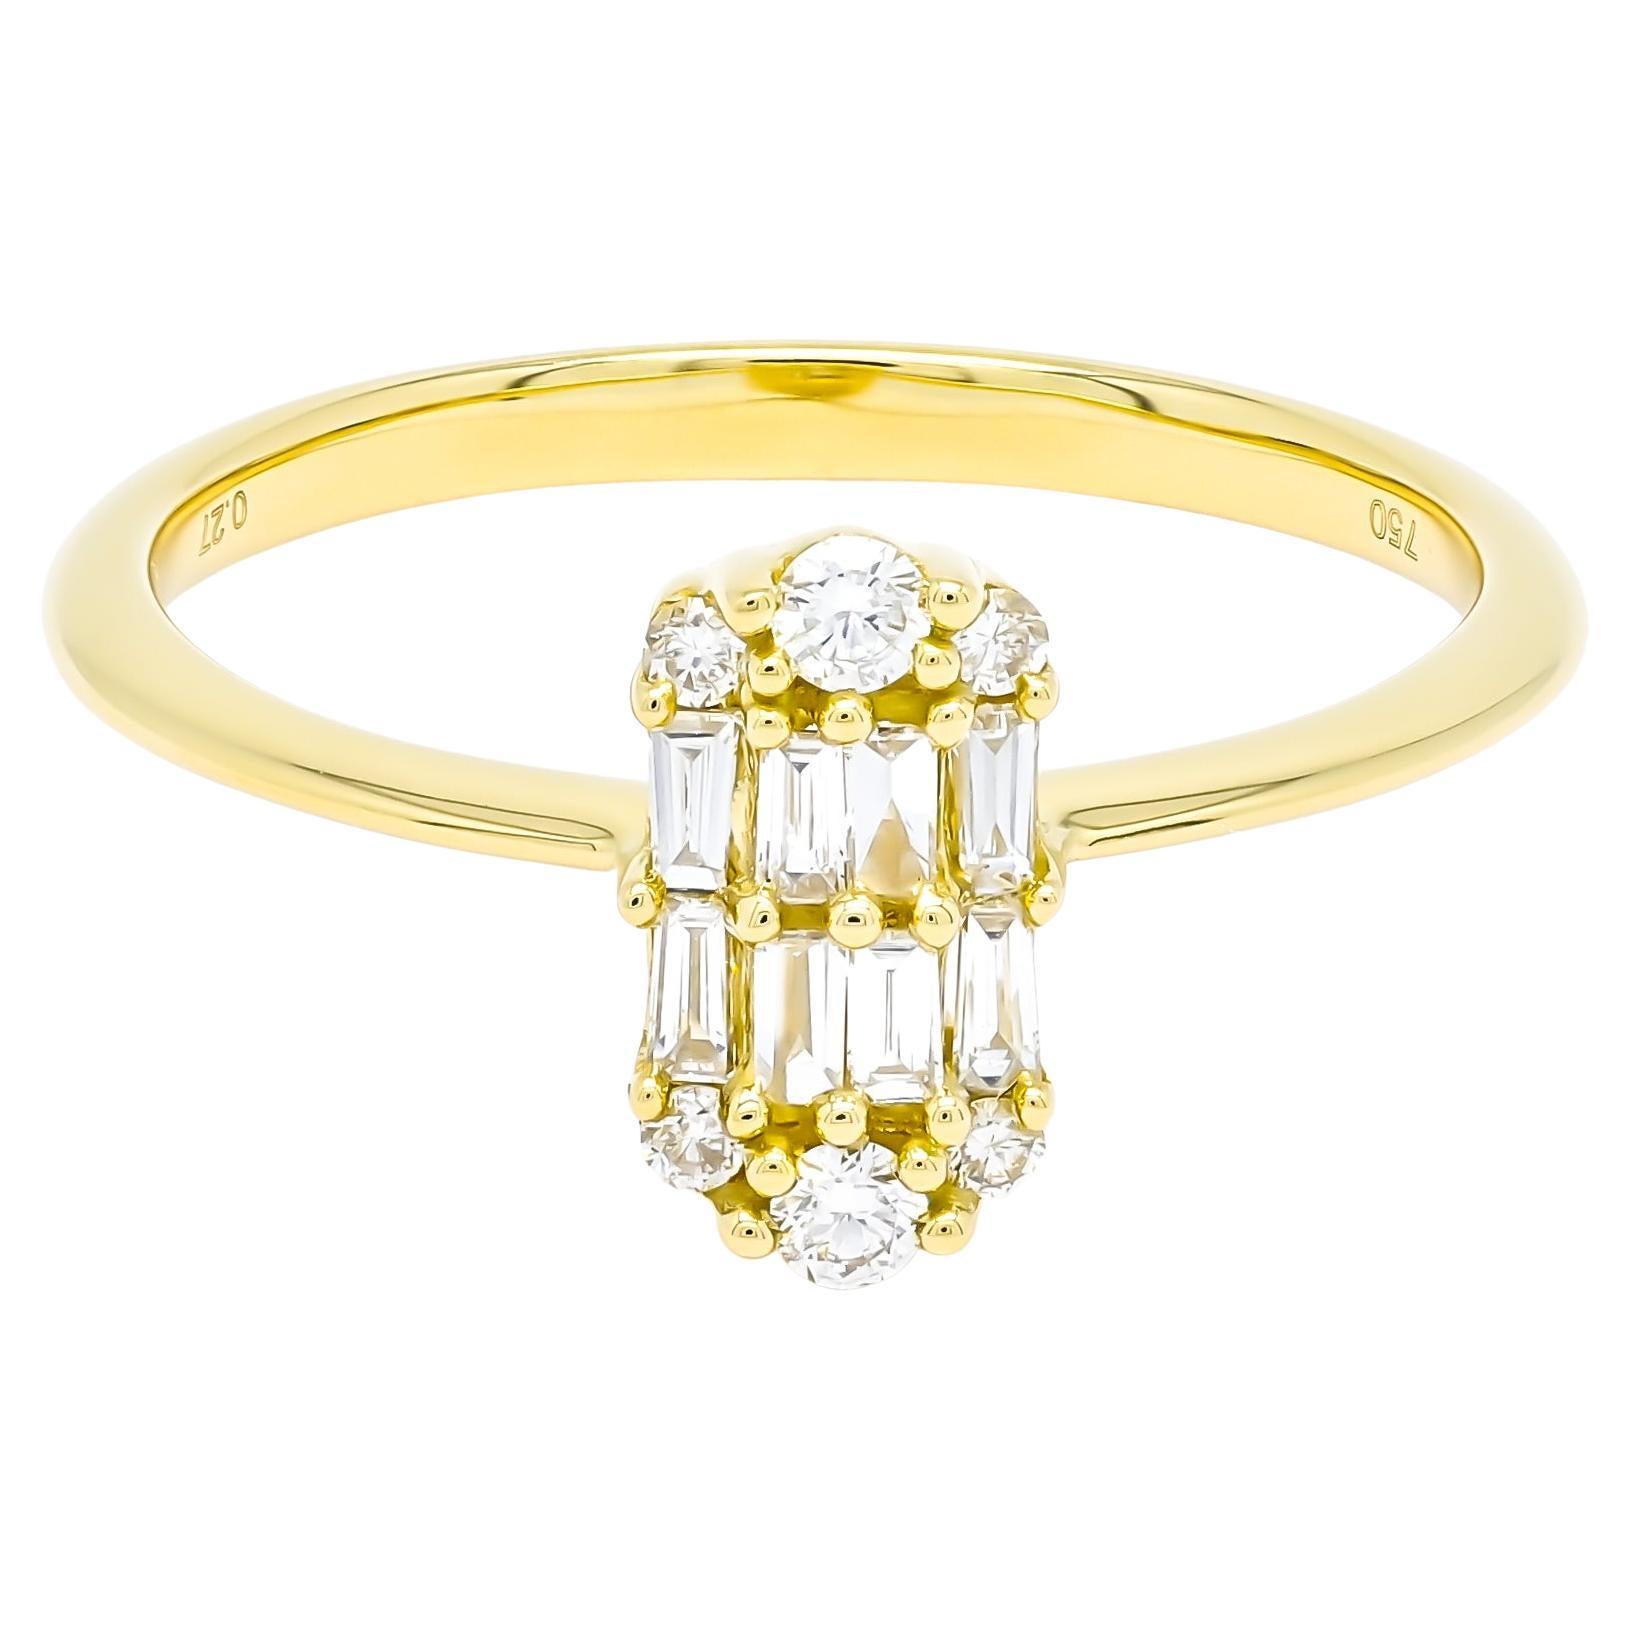 18KT Yellow Gold Natural Baguette Round Diamonds Illusion Cluster Art Deco Ring